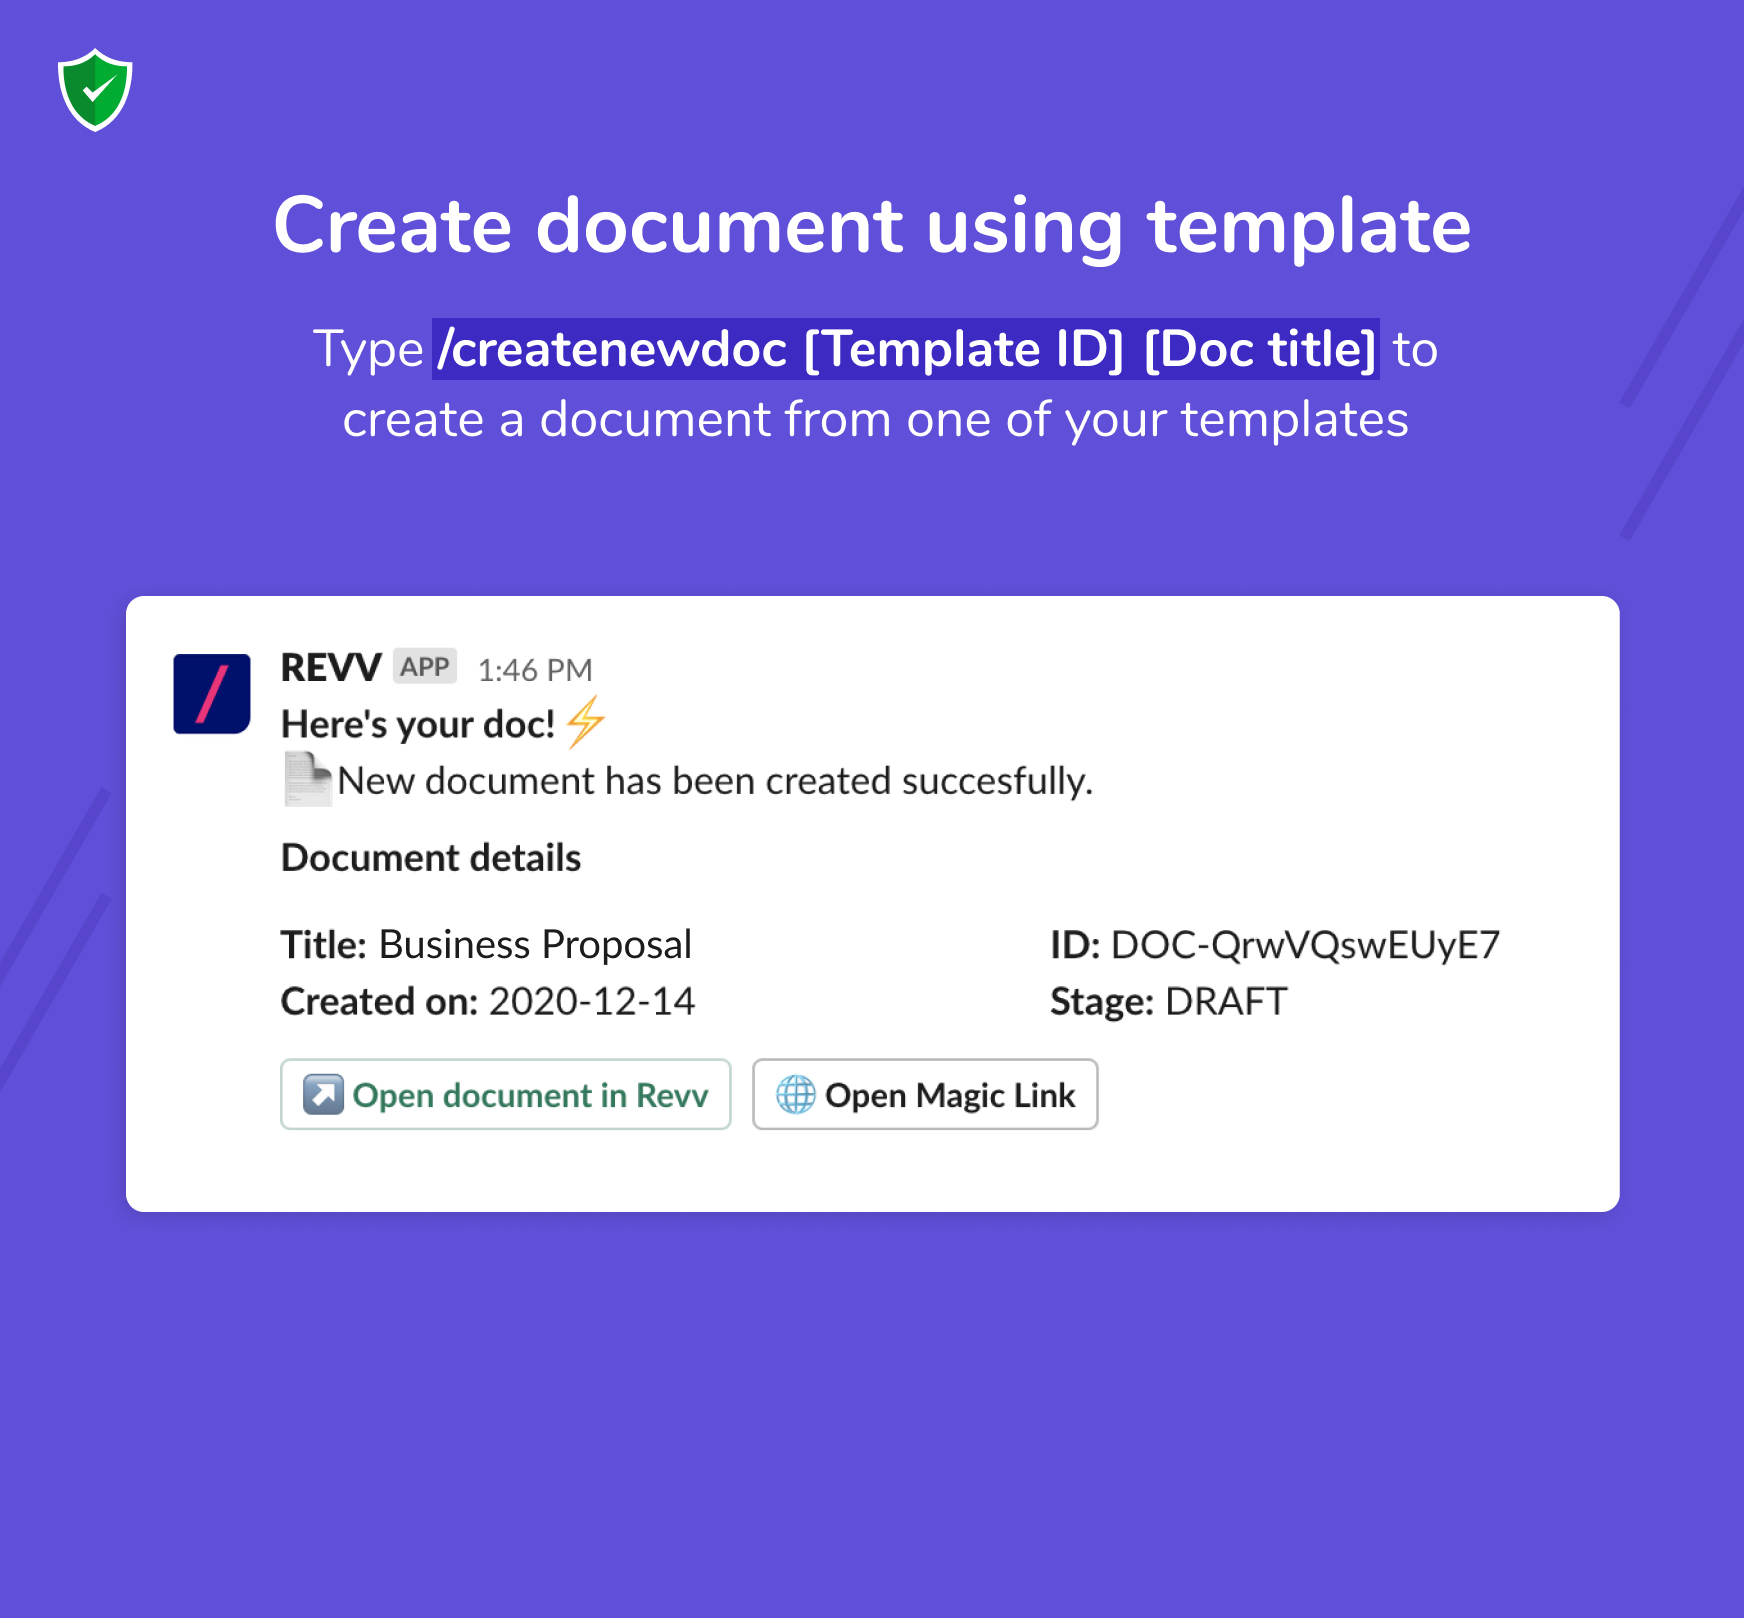 Revv is your no-code document builder that helps automate your business processes.